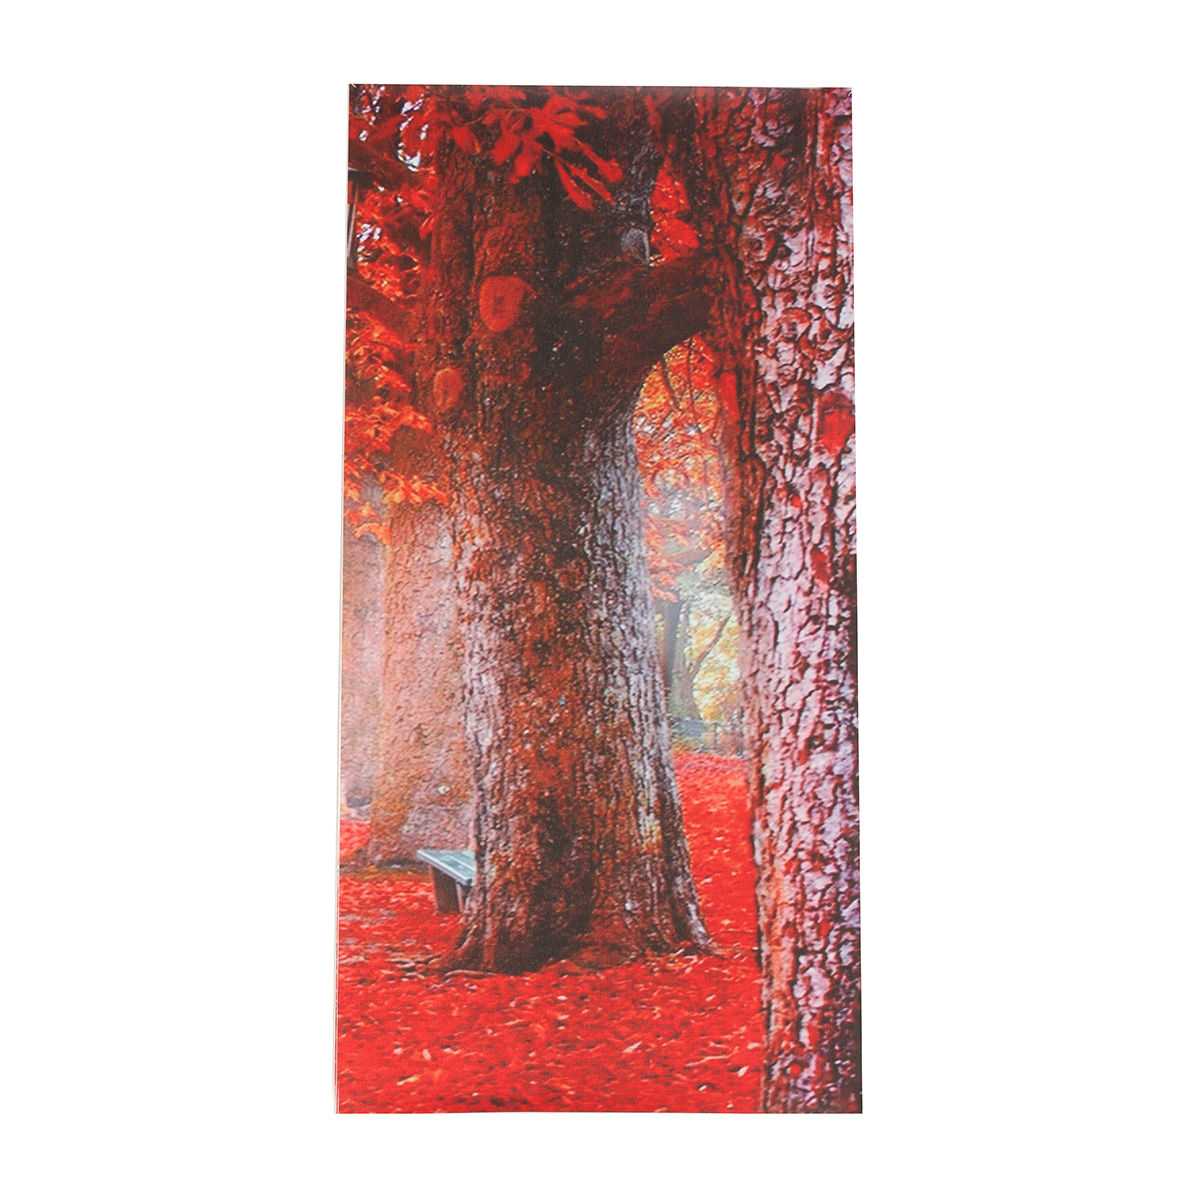 5Pcs-Red-Falling-Leaves-Canvas-Painting-Autumn-Tree-Wall-Decorative-Print-Art-Pictures-Unframed-Wall-1809936-10